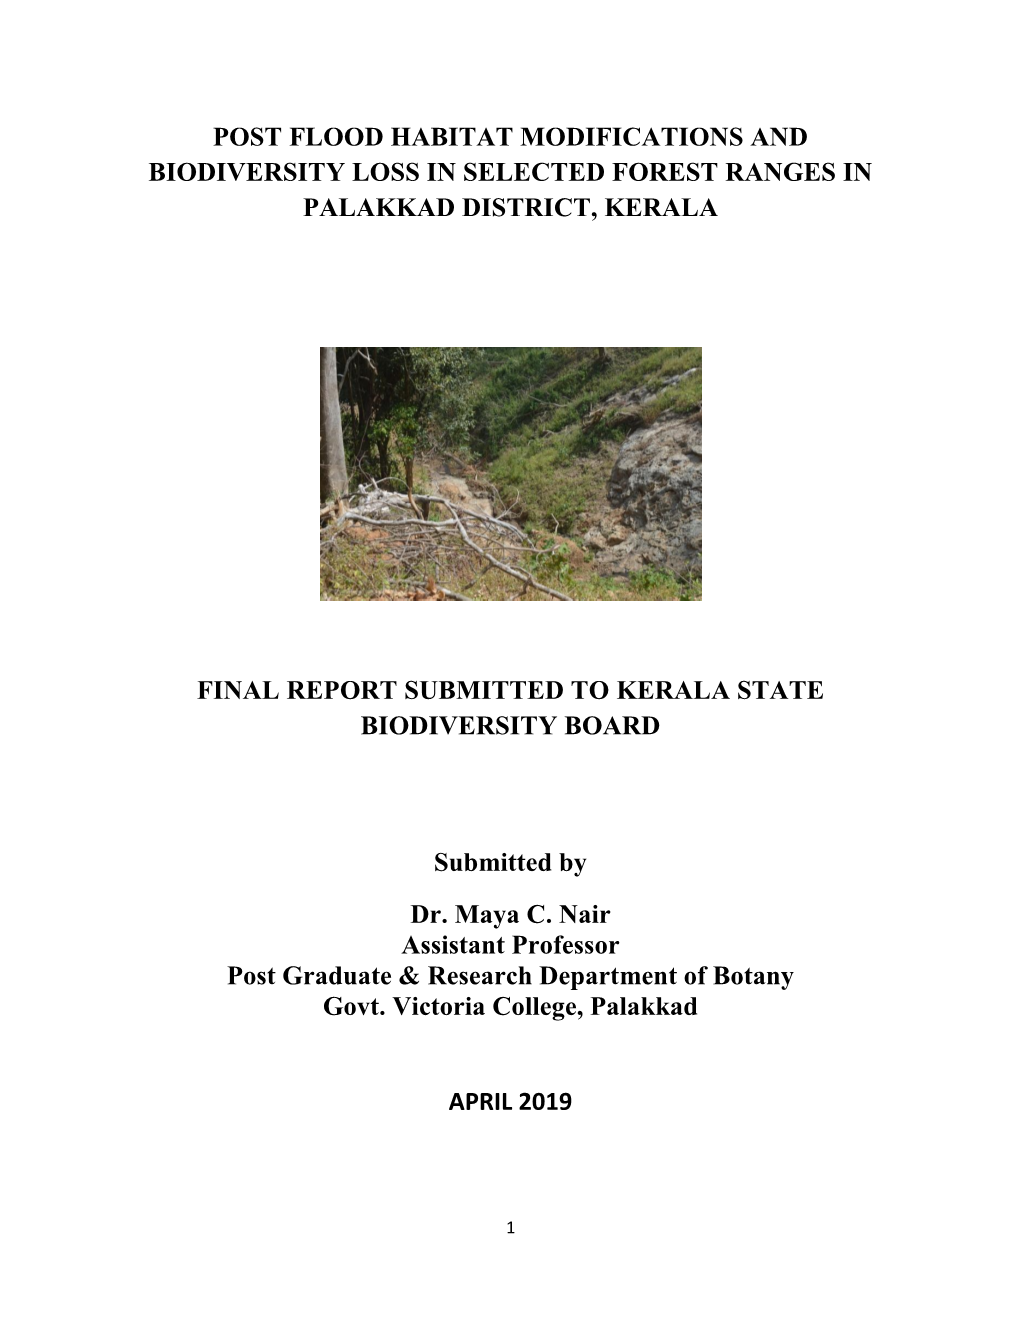 Post Flood Habitat Modifications and Biodiversity Loss in Selected Forest Ranges in Palakkad District, Kerala